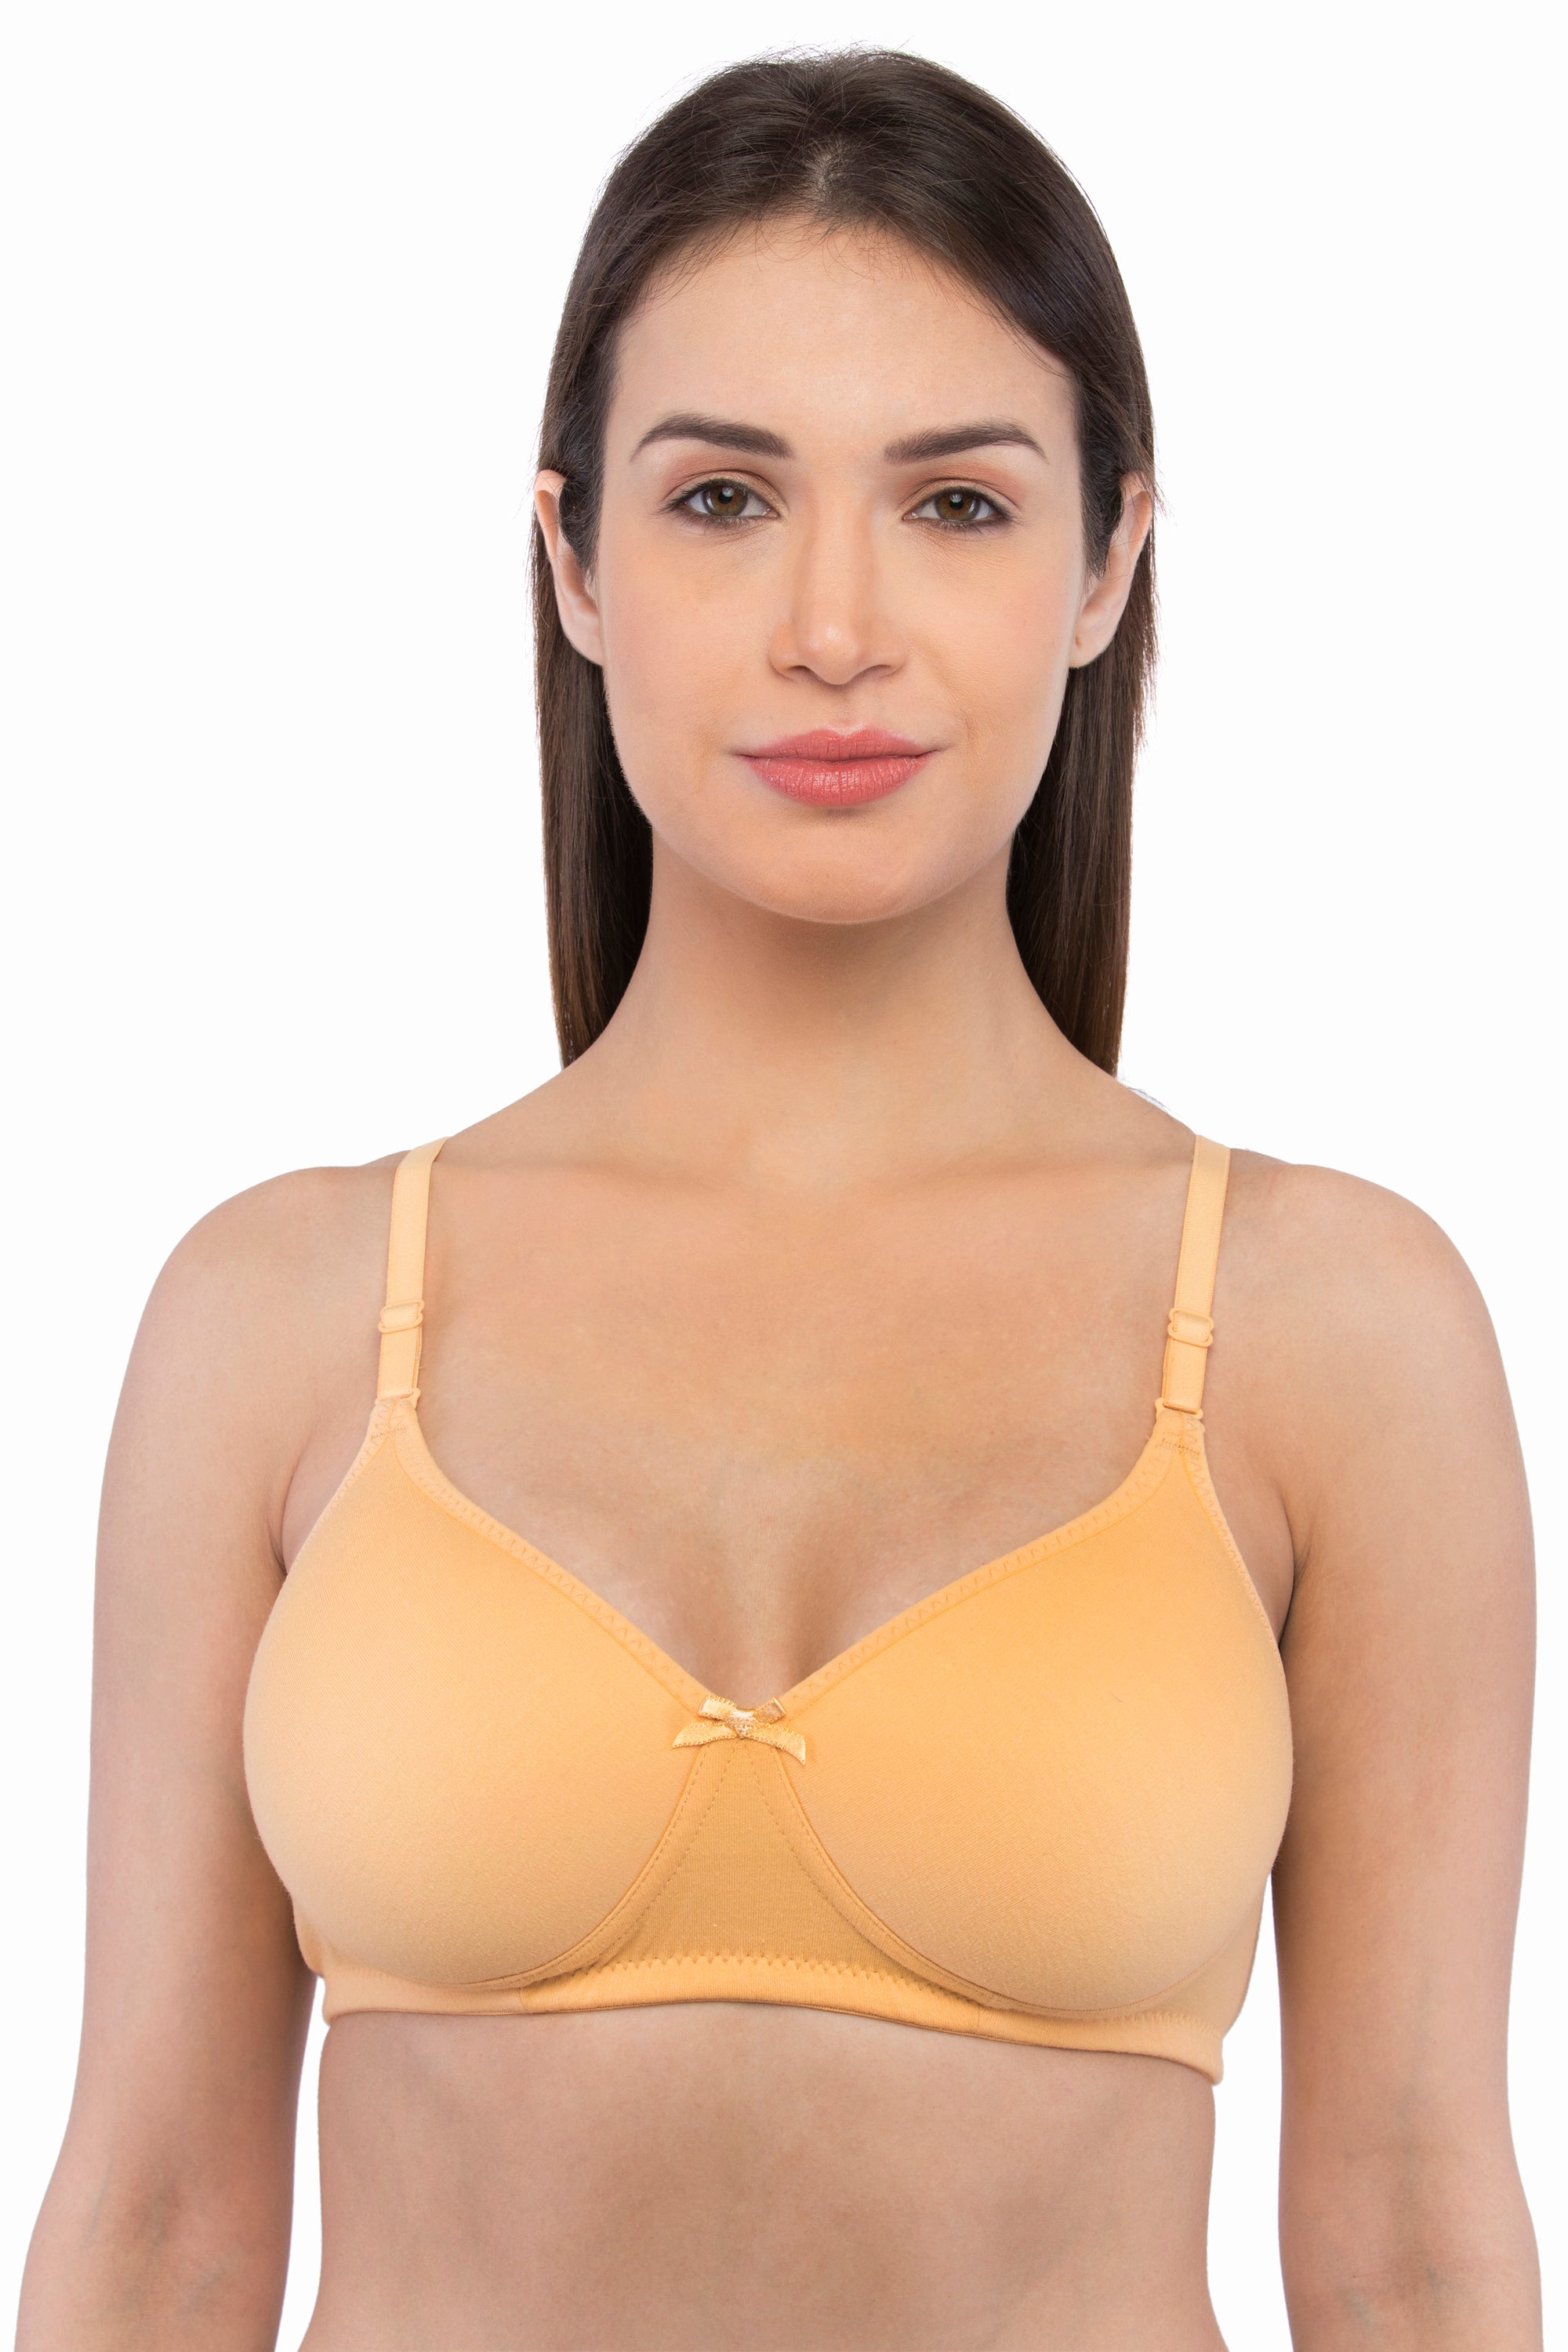 Buy Feelings Medium Coverage Non-Padded & Non-Wired Cotton Bra